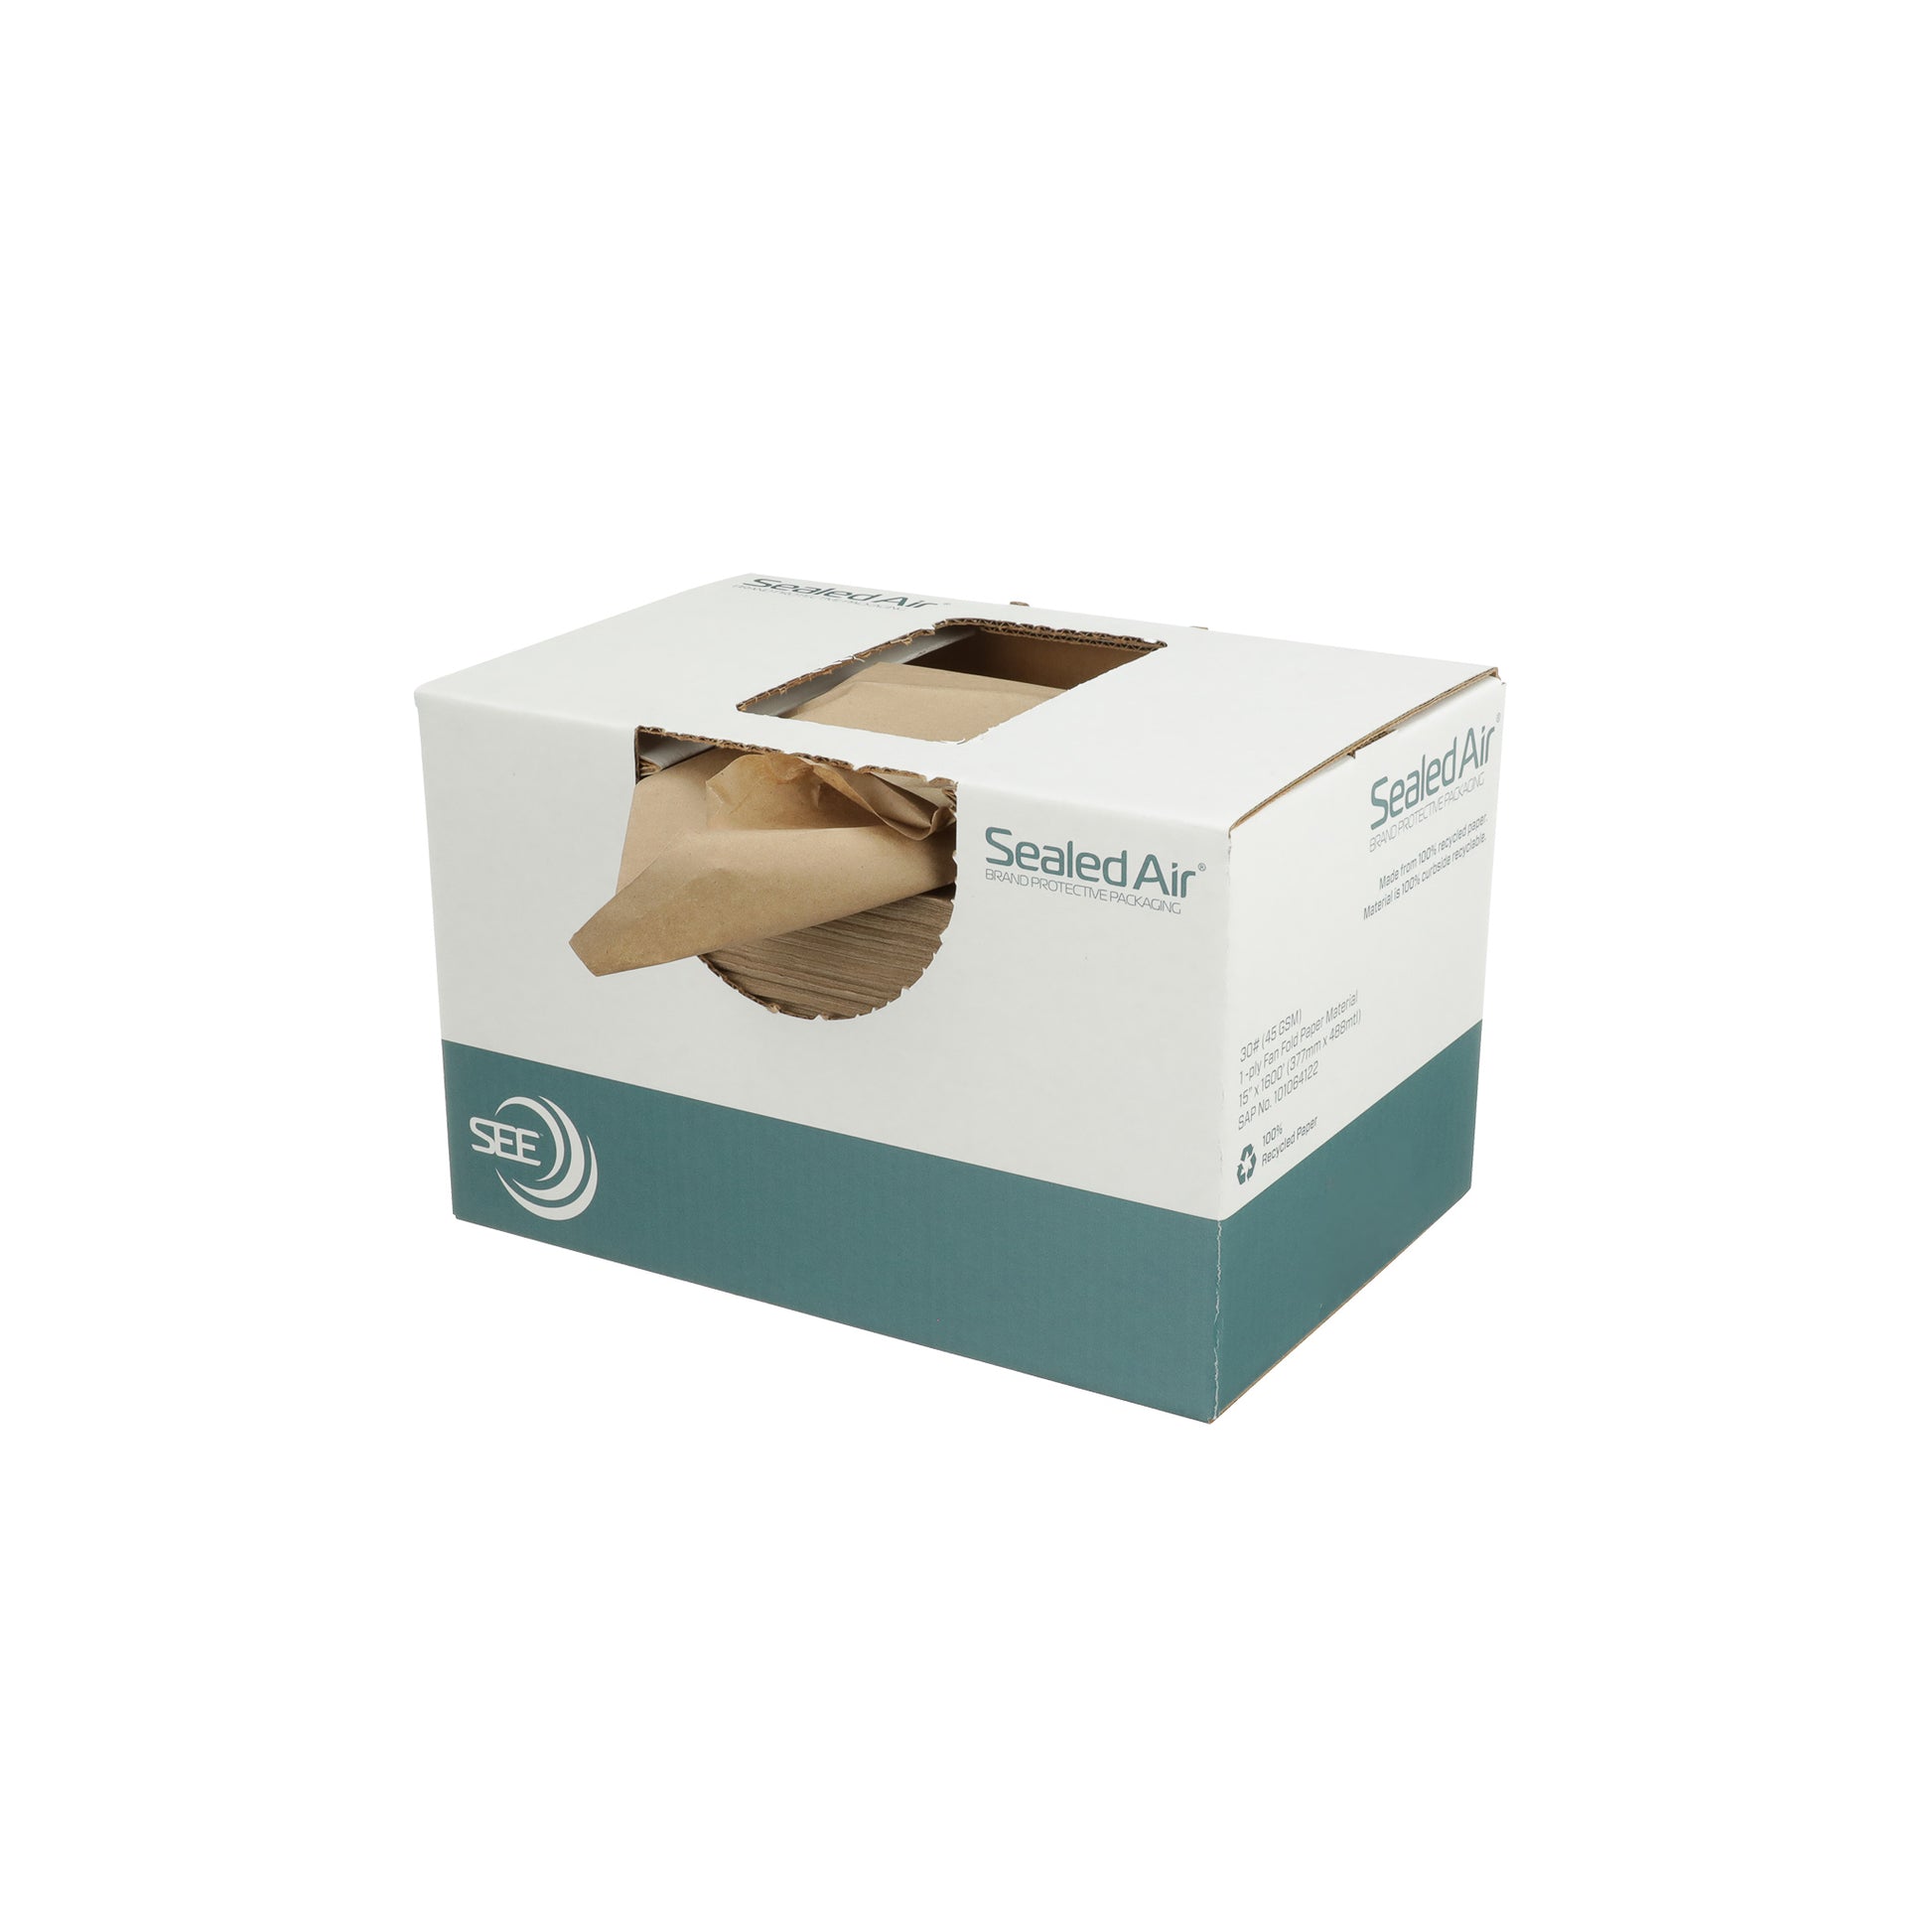 FasFil Mini Paper Packaging by Sealed Air – Sealed Air Small Business